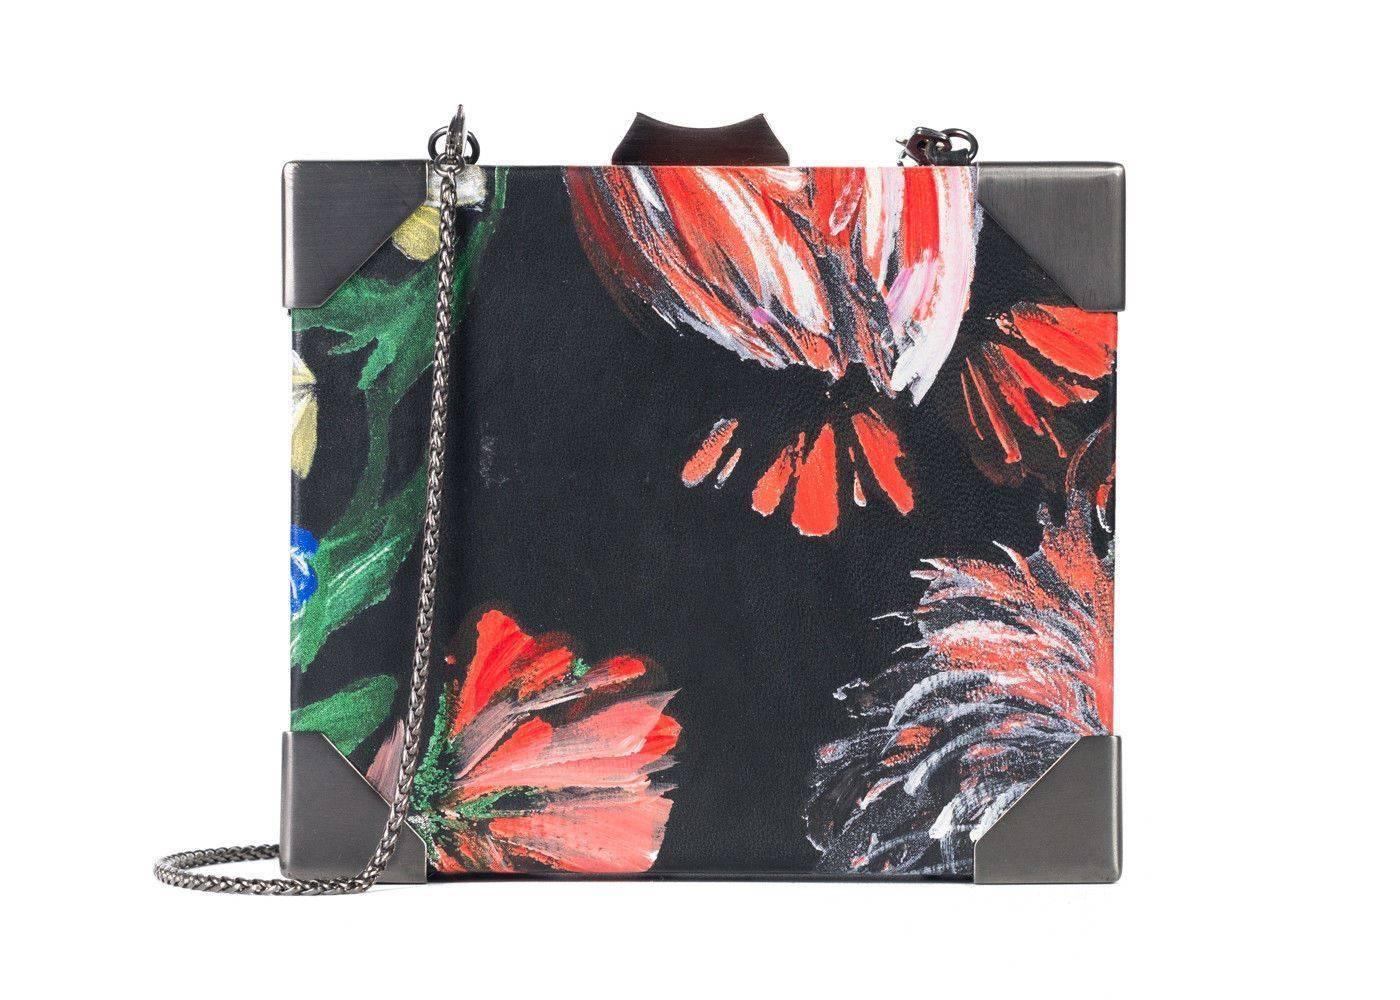 Roberto Cavalli Black Leather Push Lock Floral Print Clutch with Straps For Sale 1